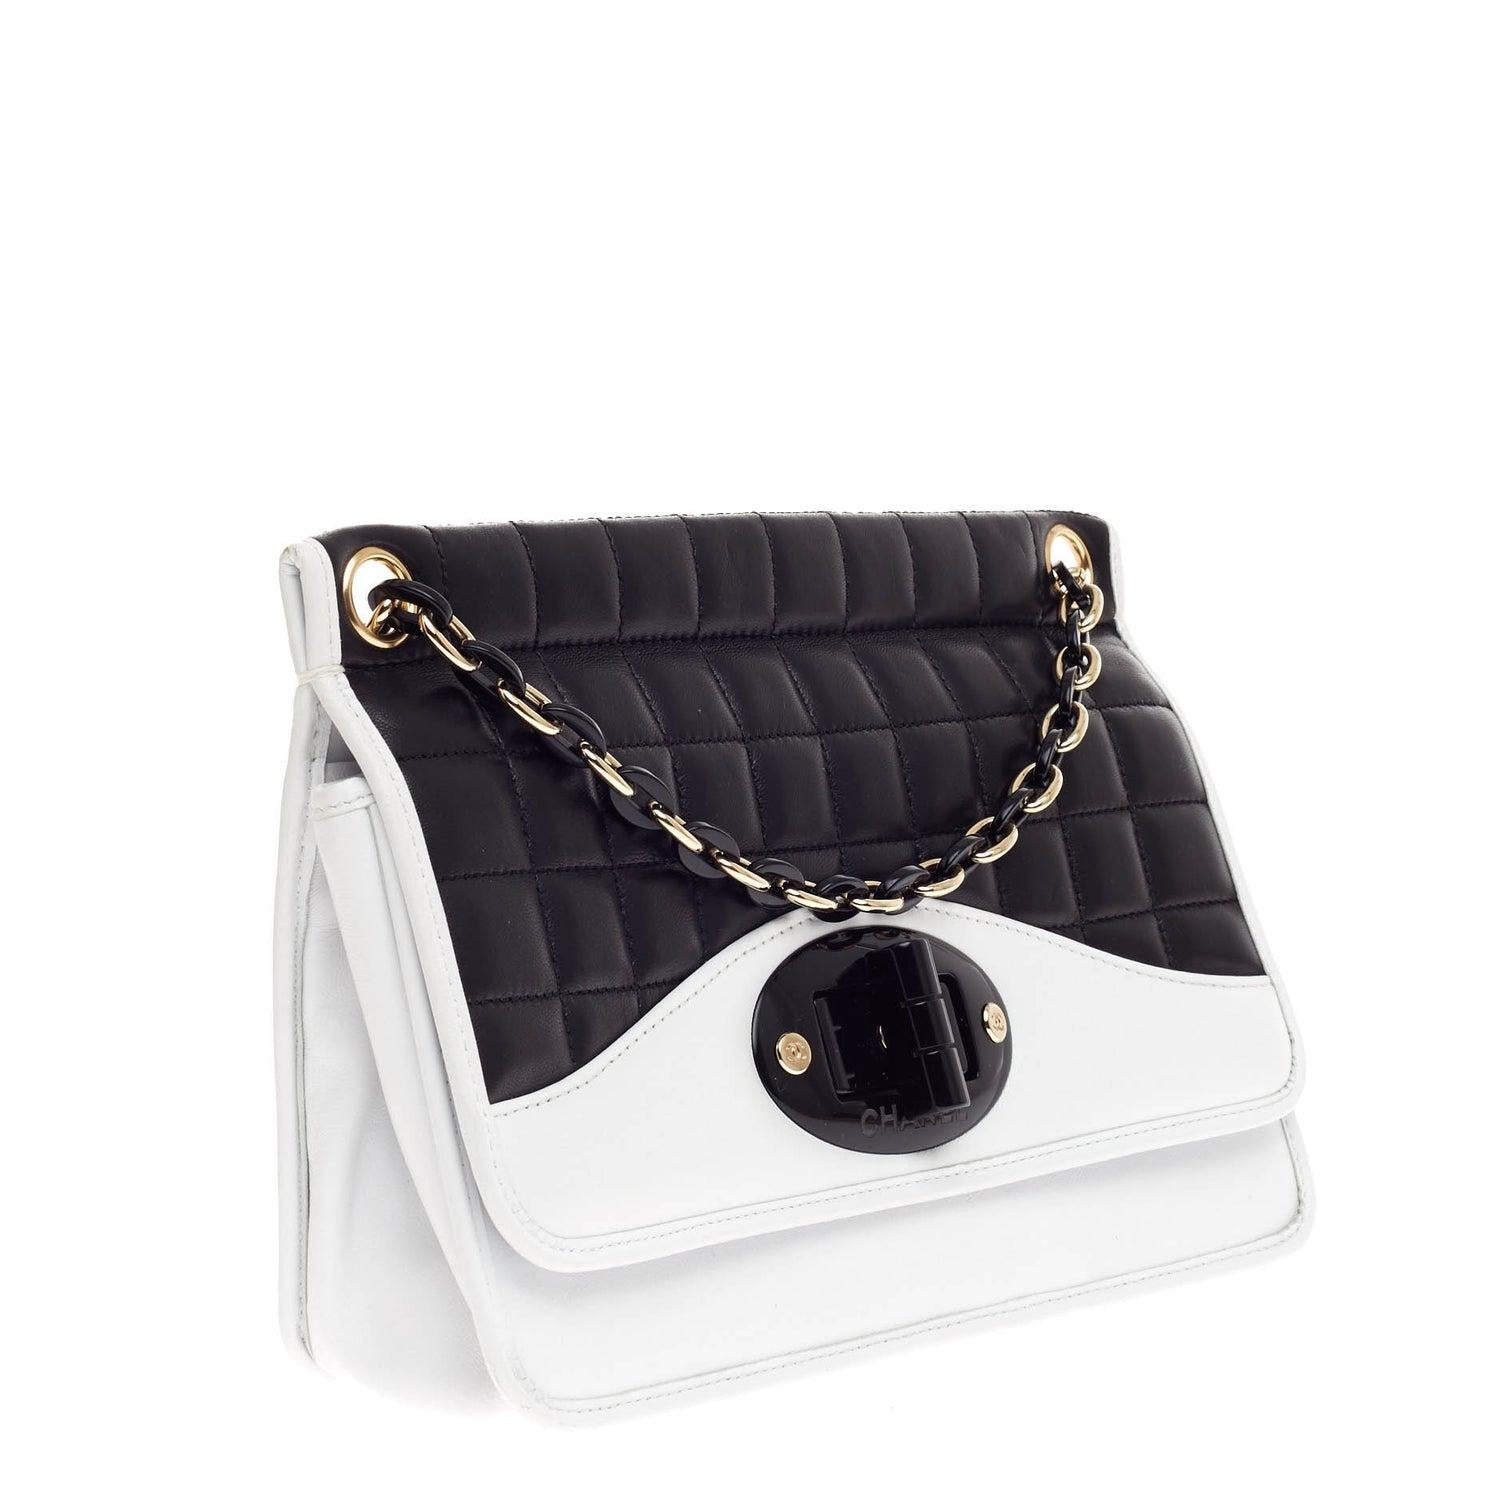 Chanel Classic Flap Two Tone Limited Edition Black & White Lambskin Leather Bag For Sale 3